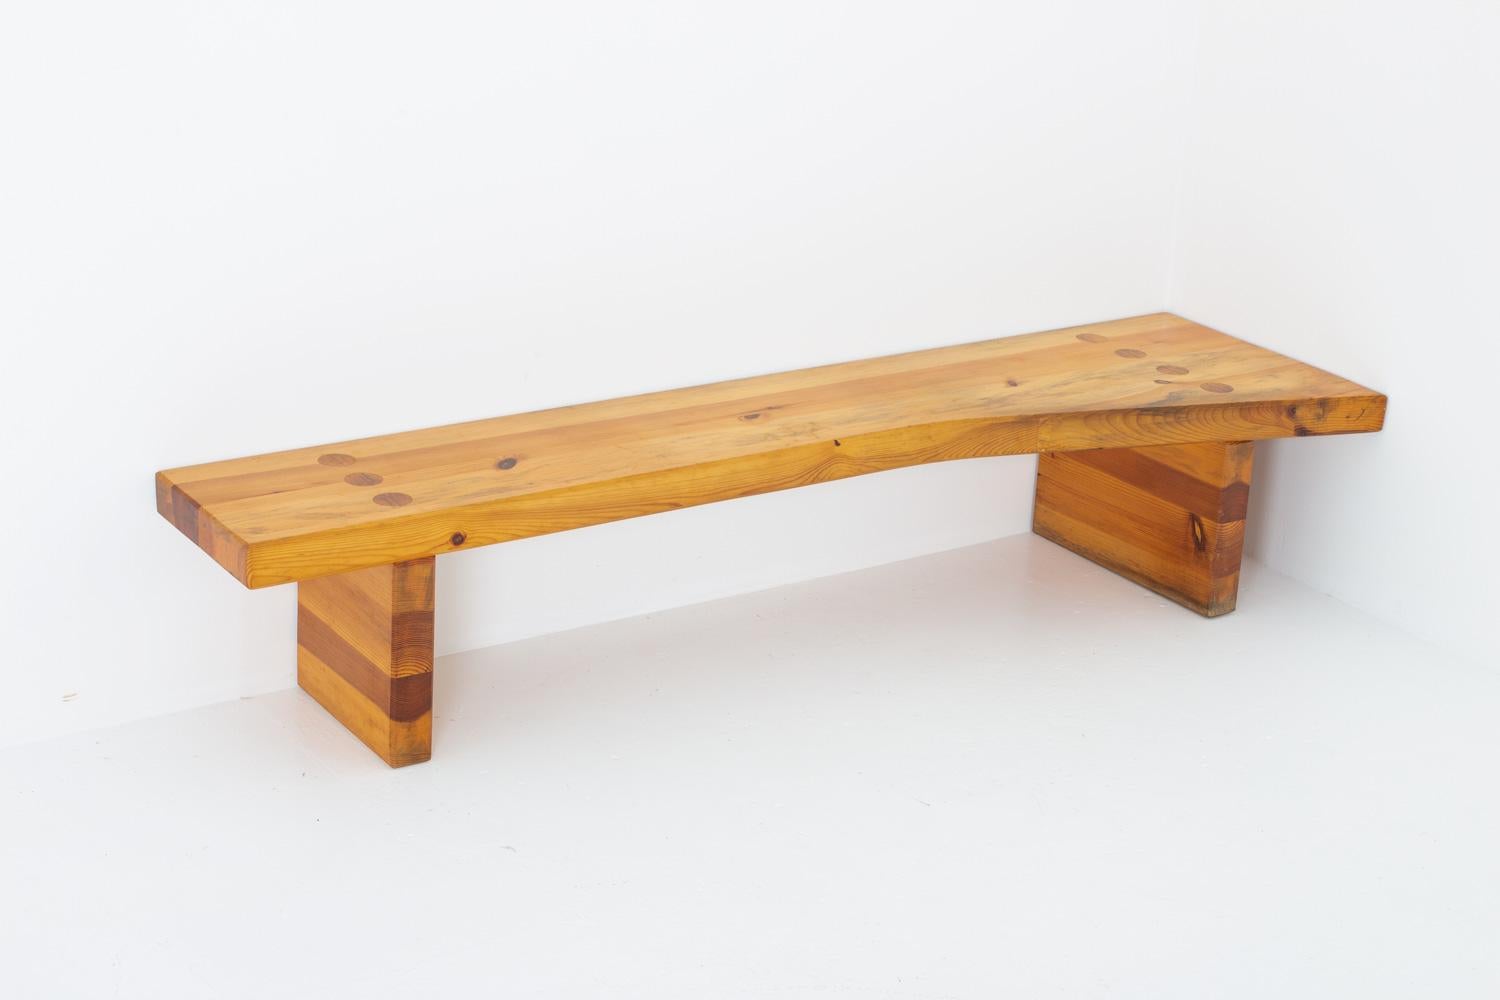 Swedish bench in thick solid pine by Sven Larsson, 1970s. 
This freeform bench was probably a special order and might be a one of a kind. The shape makes it a perfect corner piece.
Condition: Good original condition with age-related wear.